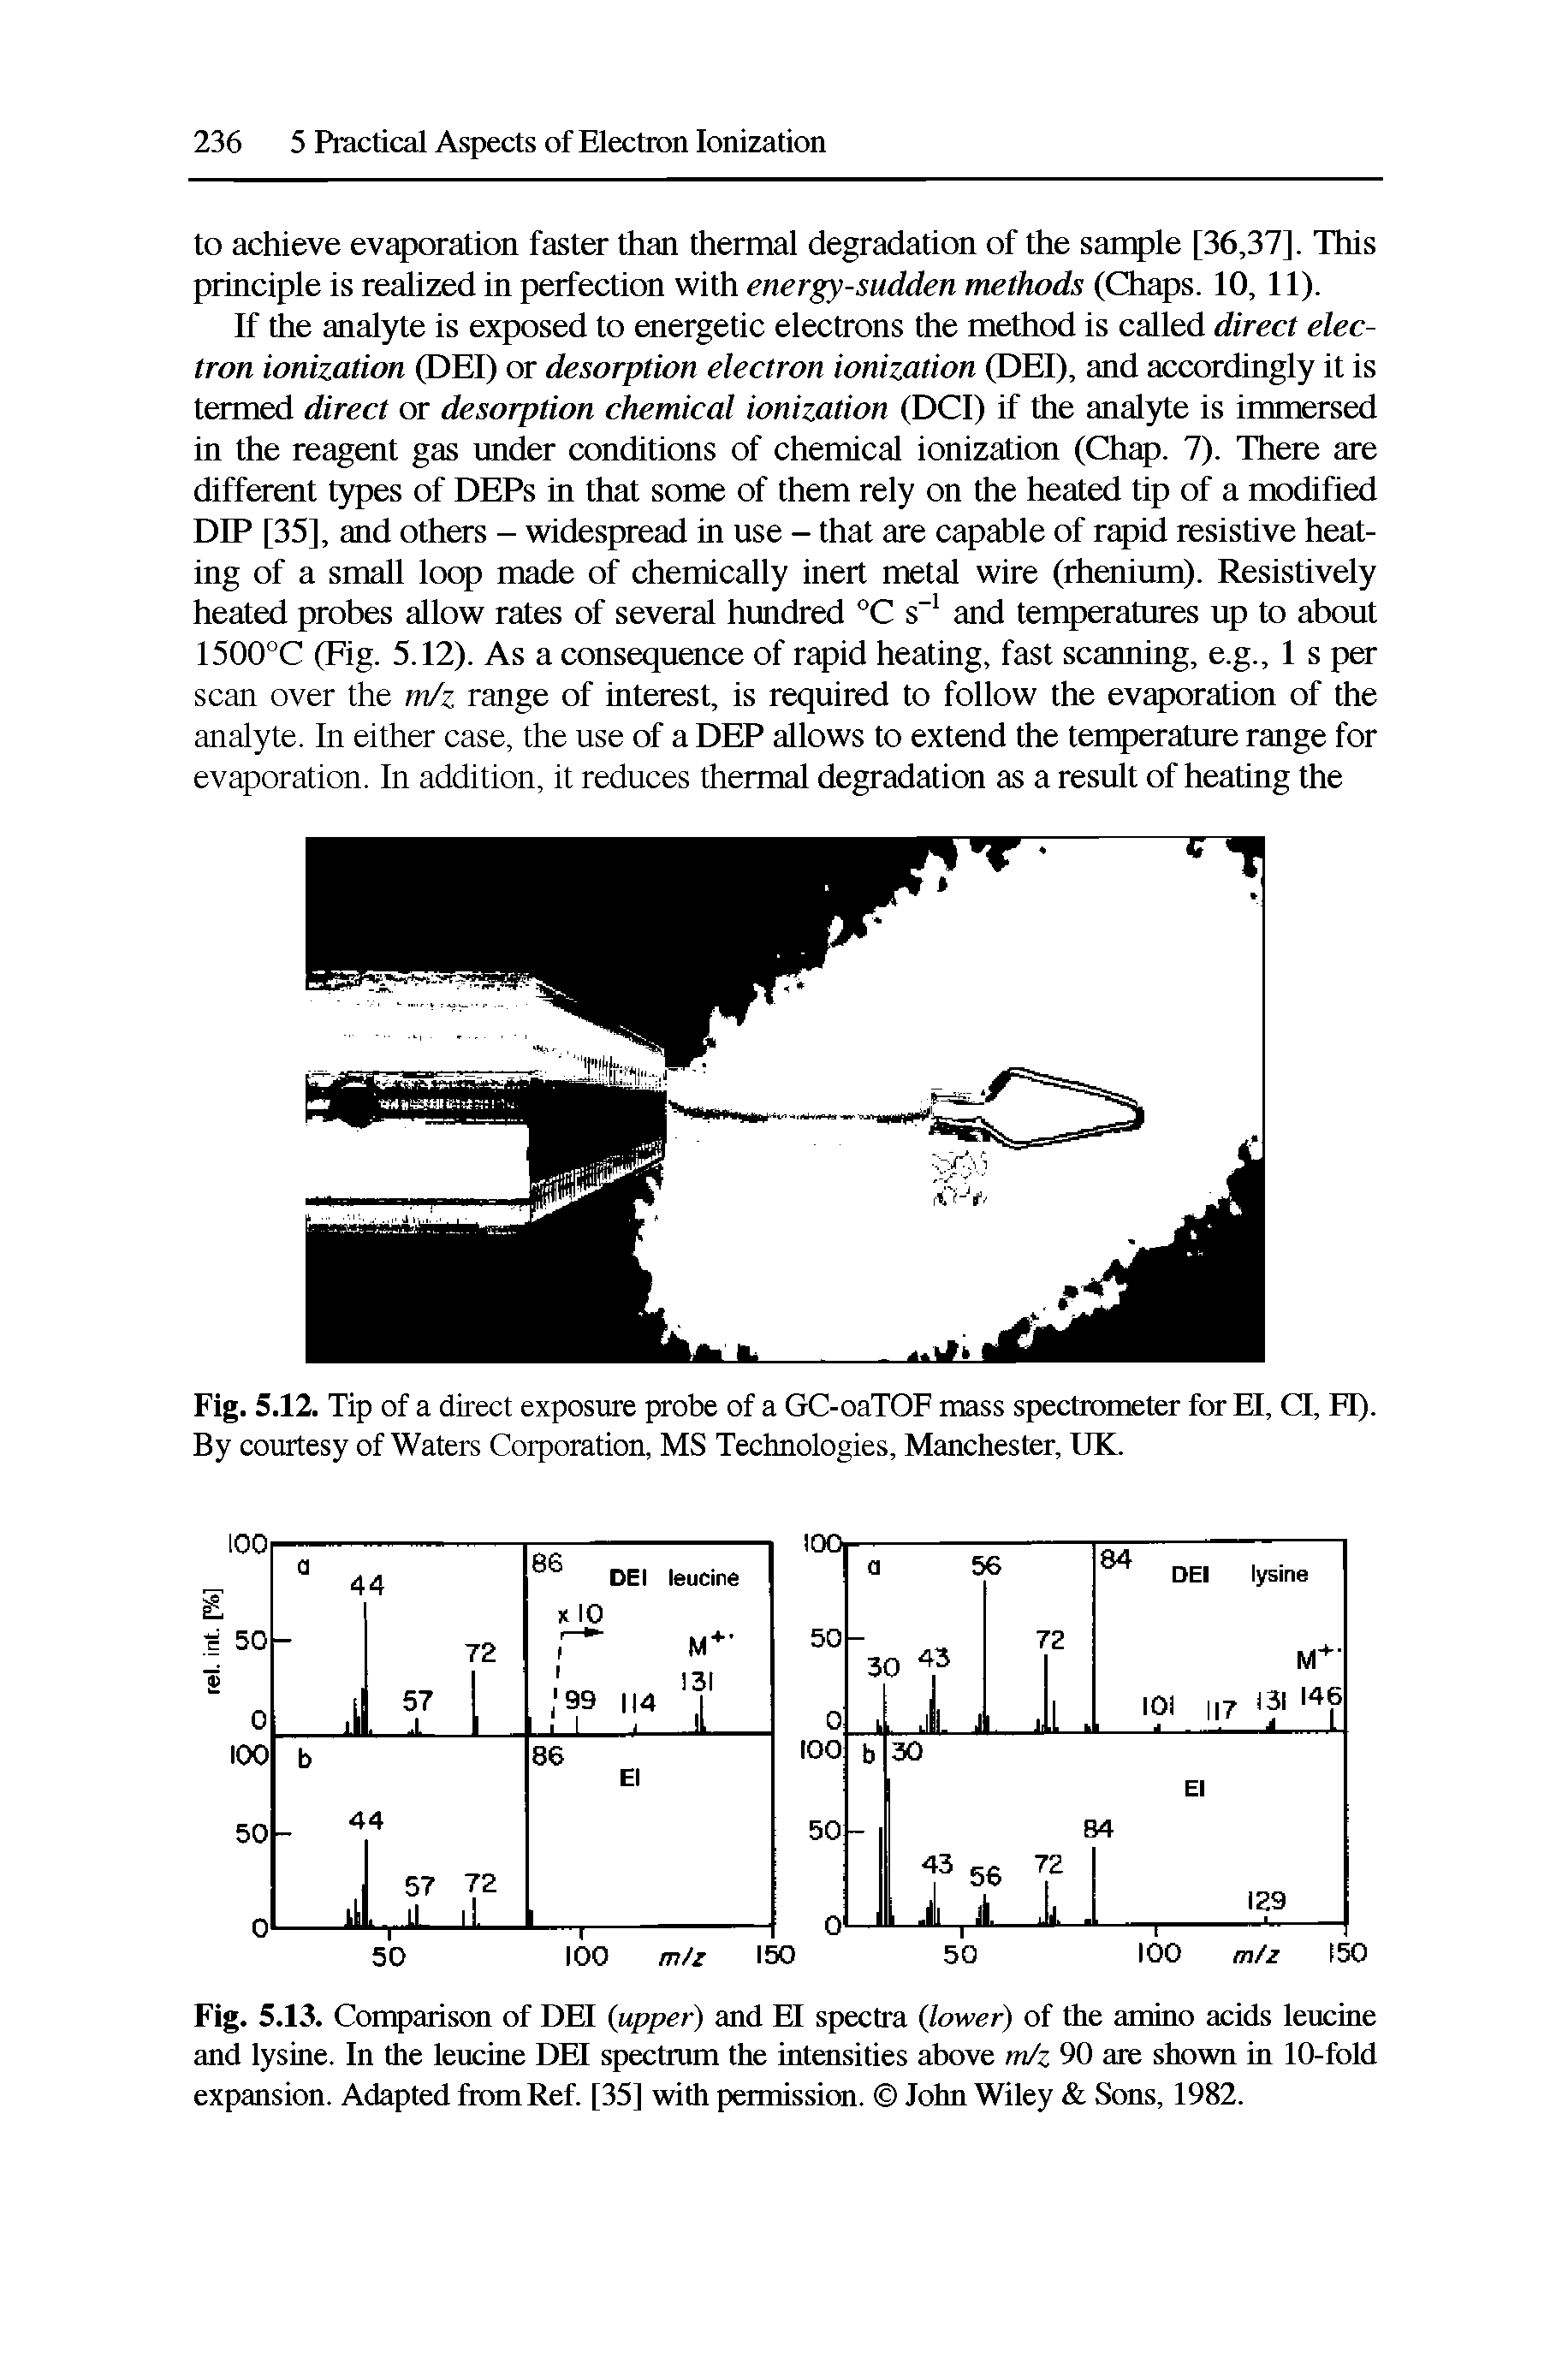 Fig. 5.13. Comparison of DEI (upper) and El spectra (lower) of the amino acids leucine and lysine. In the leucine DEI spectrum the intensities above m/z 90 are shown in 10-fold expansion. Adapted from Ref. [35] with permission. John Wiley Sons, 1982.